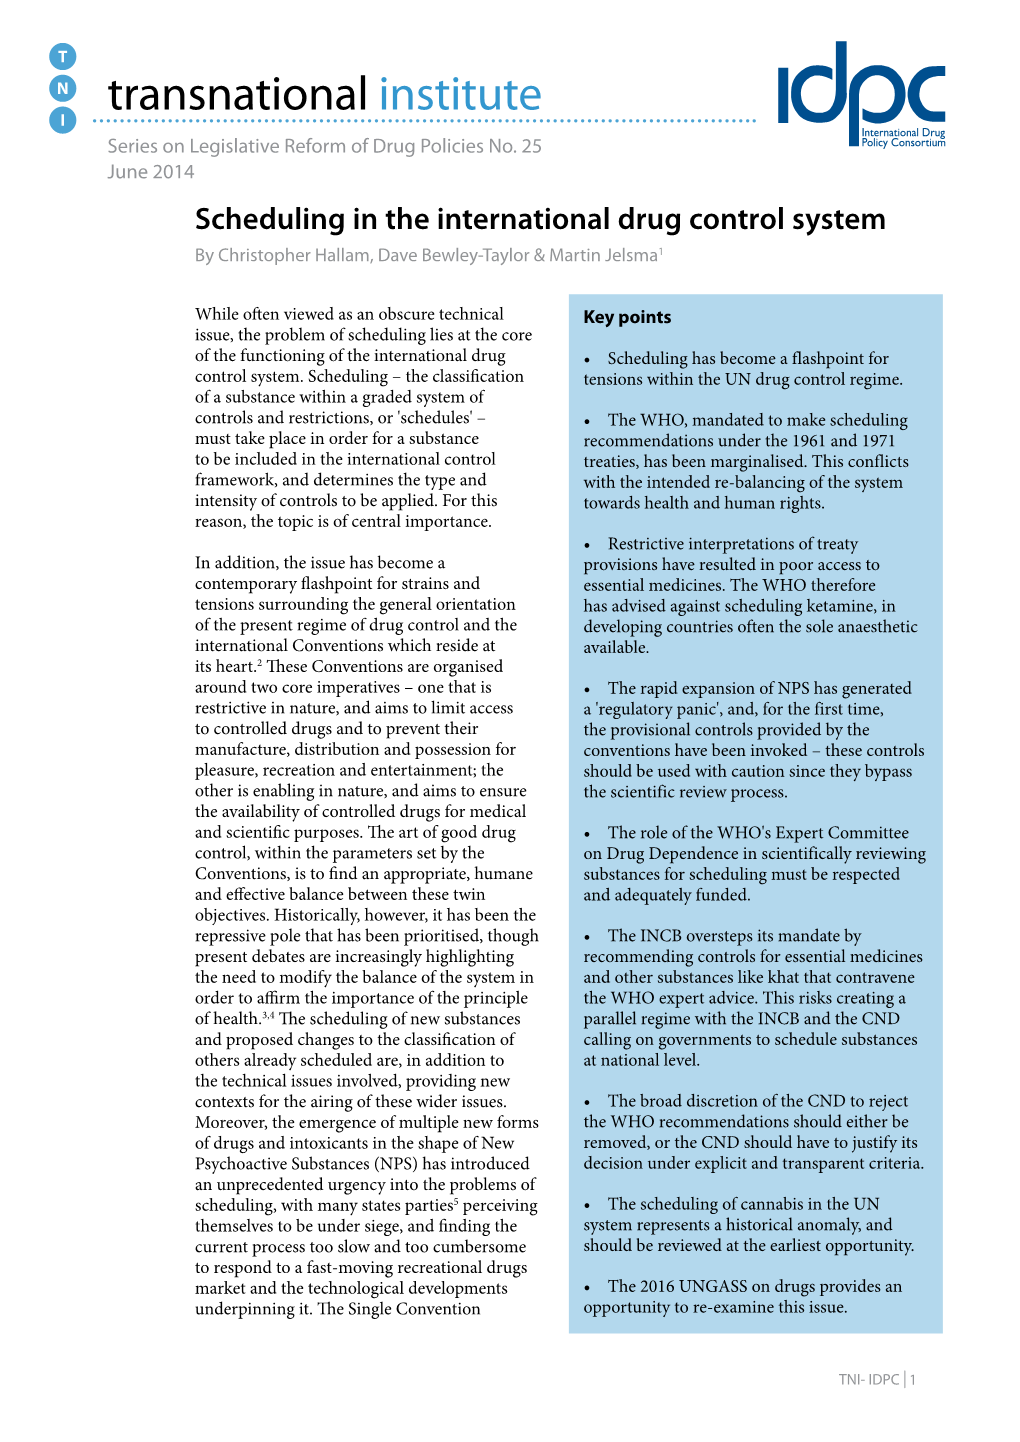 Scheduling in the International Drug Control System by Christopher Hallam, Dave Bewley-Taylor & Martin Jelsma1